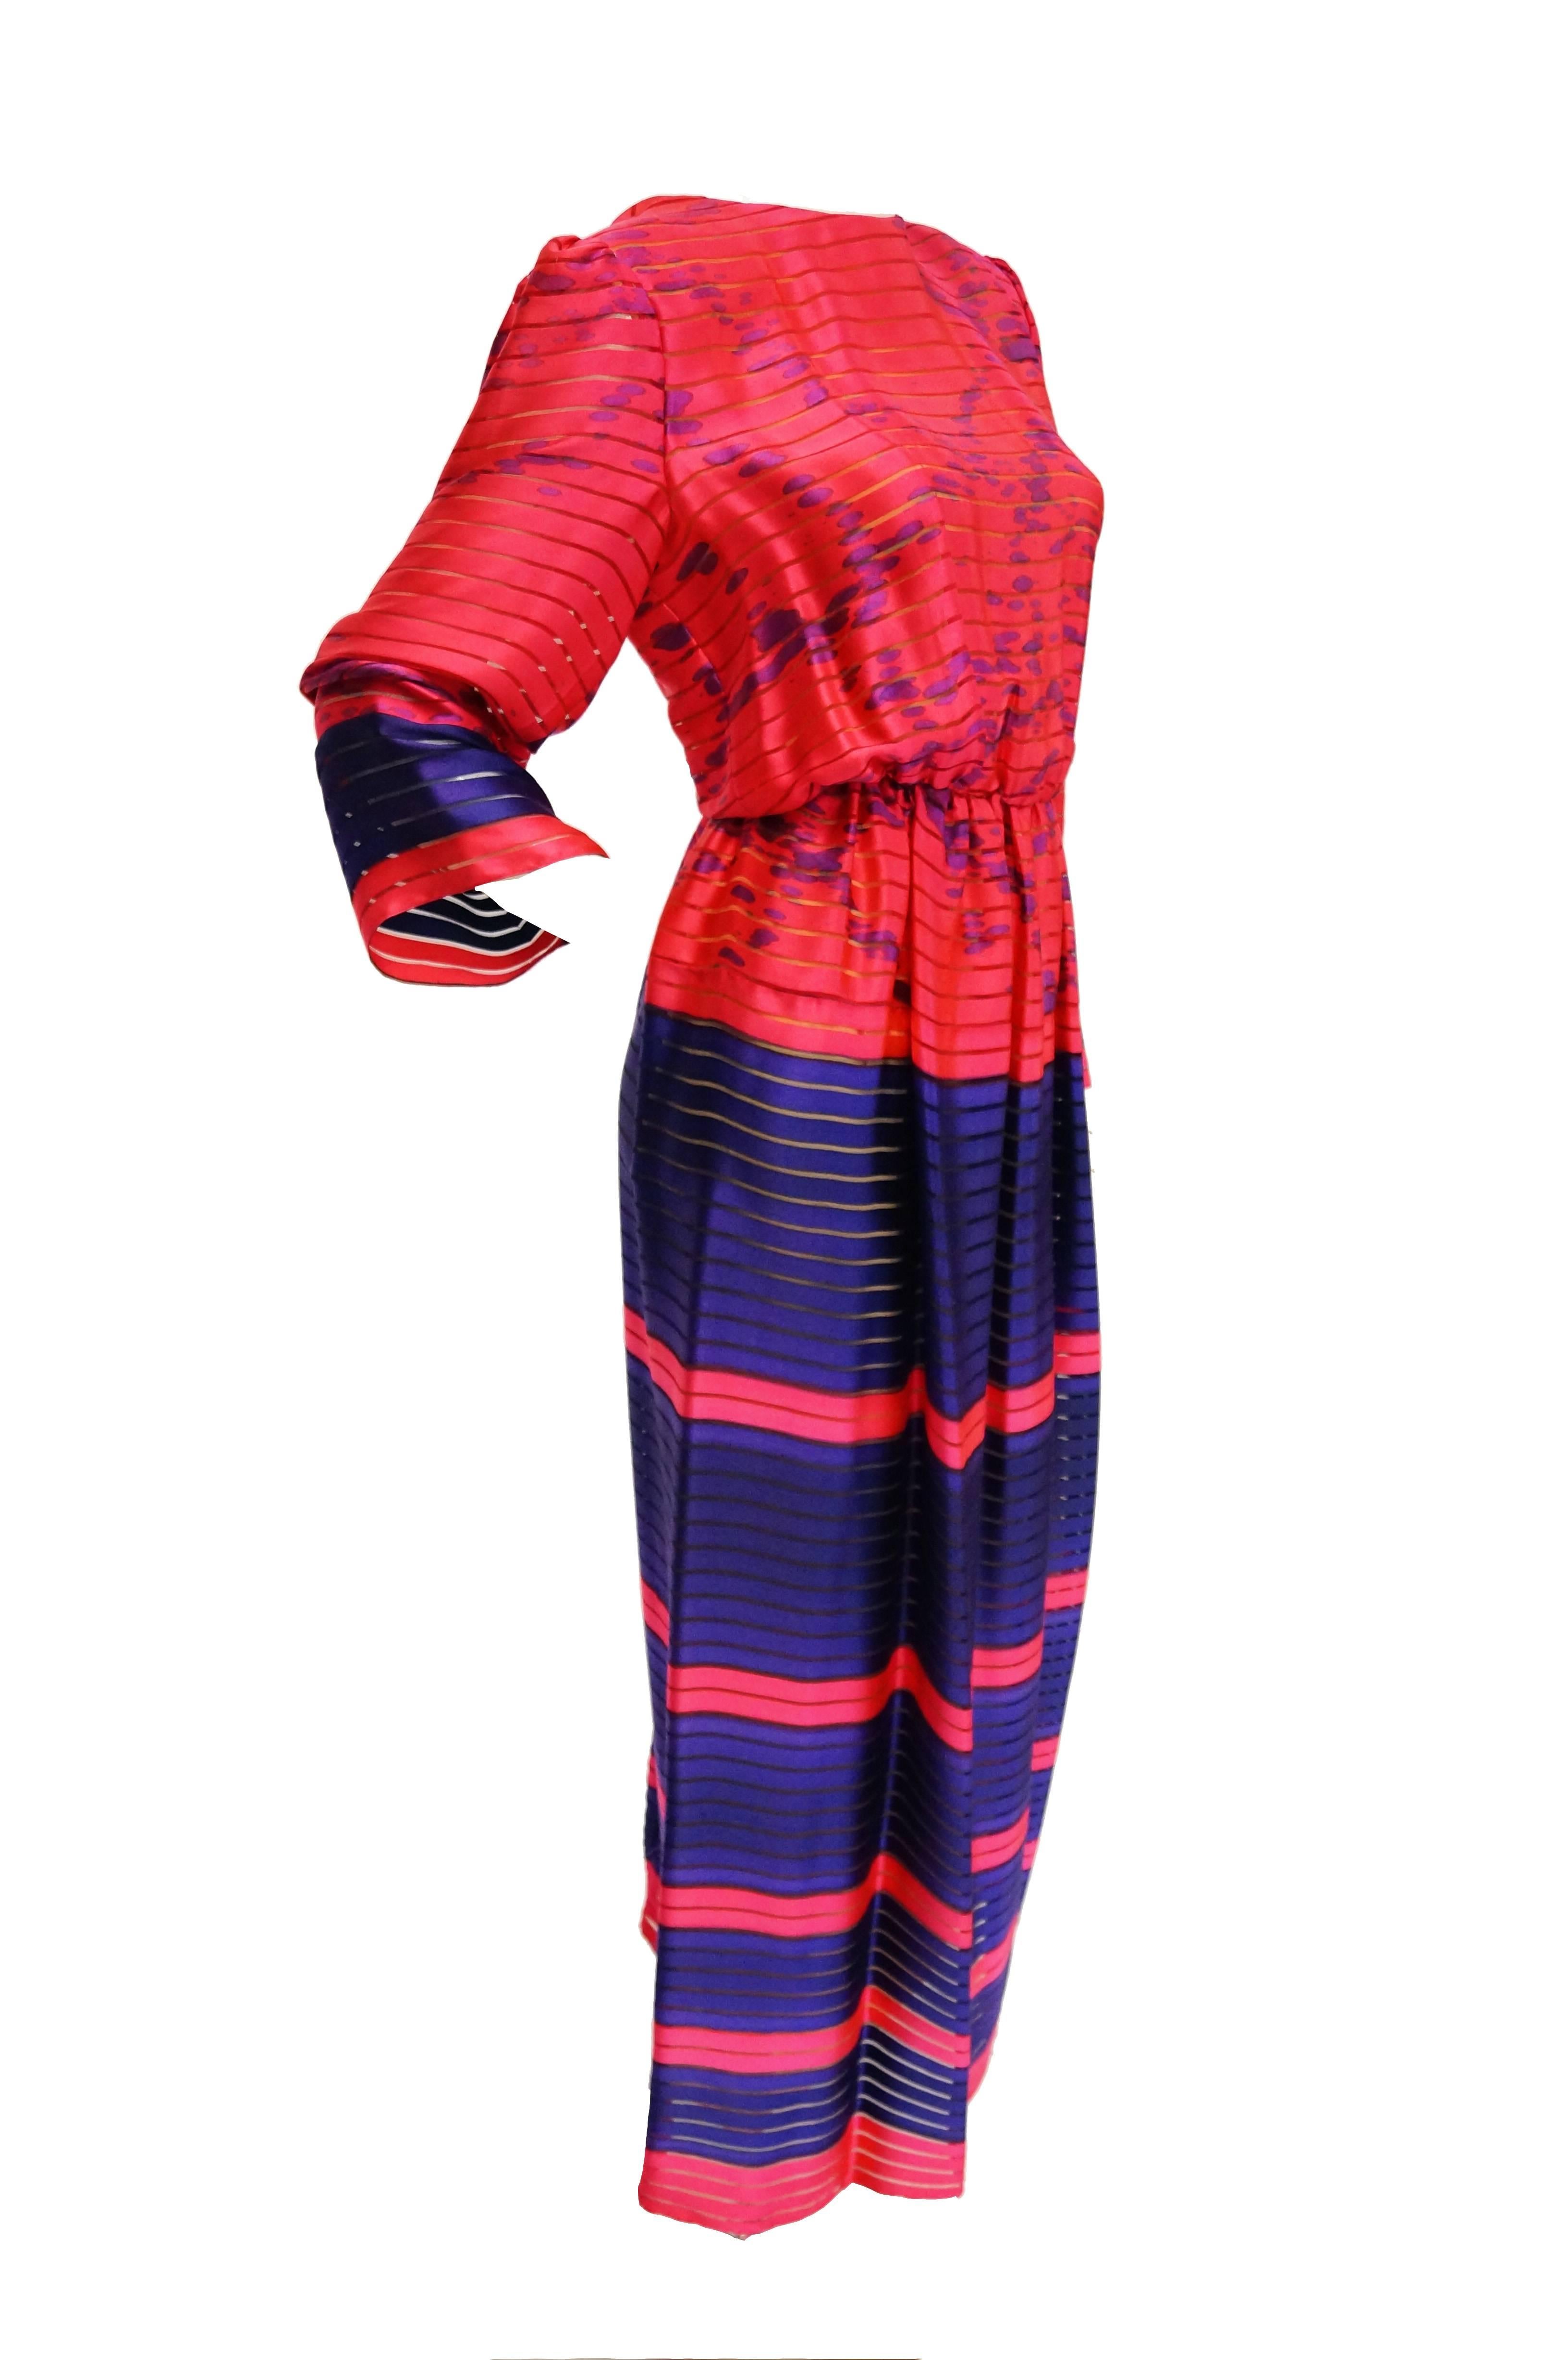 Absolutely striking bright, neon pink and purple dress by Bill Blass. The dress is maxi floor length, has long sleeves, and a round jewel collar. The dress has a pinched blouson waist and a keyhole opening with button at the back of the neck. The